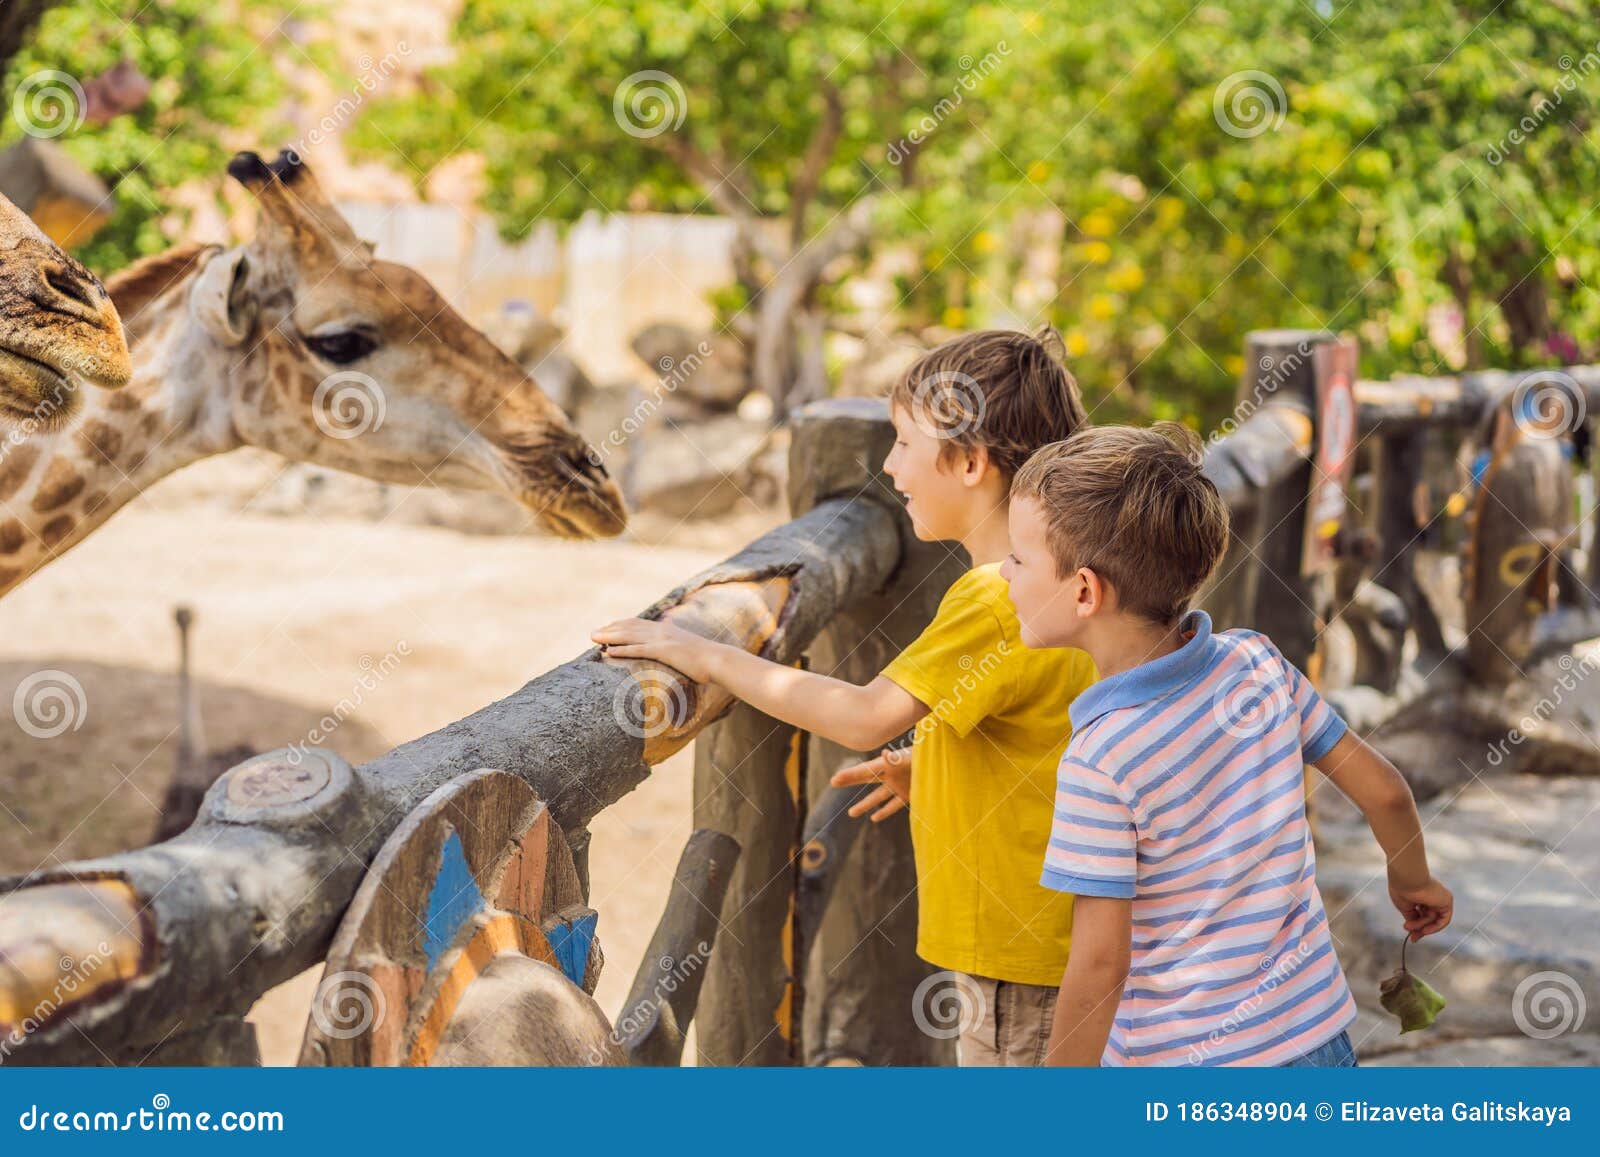 Happy Boys Watching and Feeding Giraffe in Zoo. they Having Fun with Animals  Safari Park on Warm Summer Day Stock Photo - Image of africa, happiness:  186348904